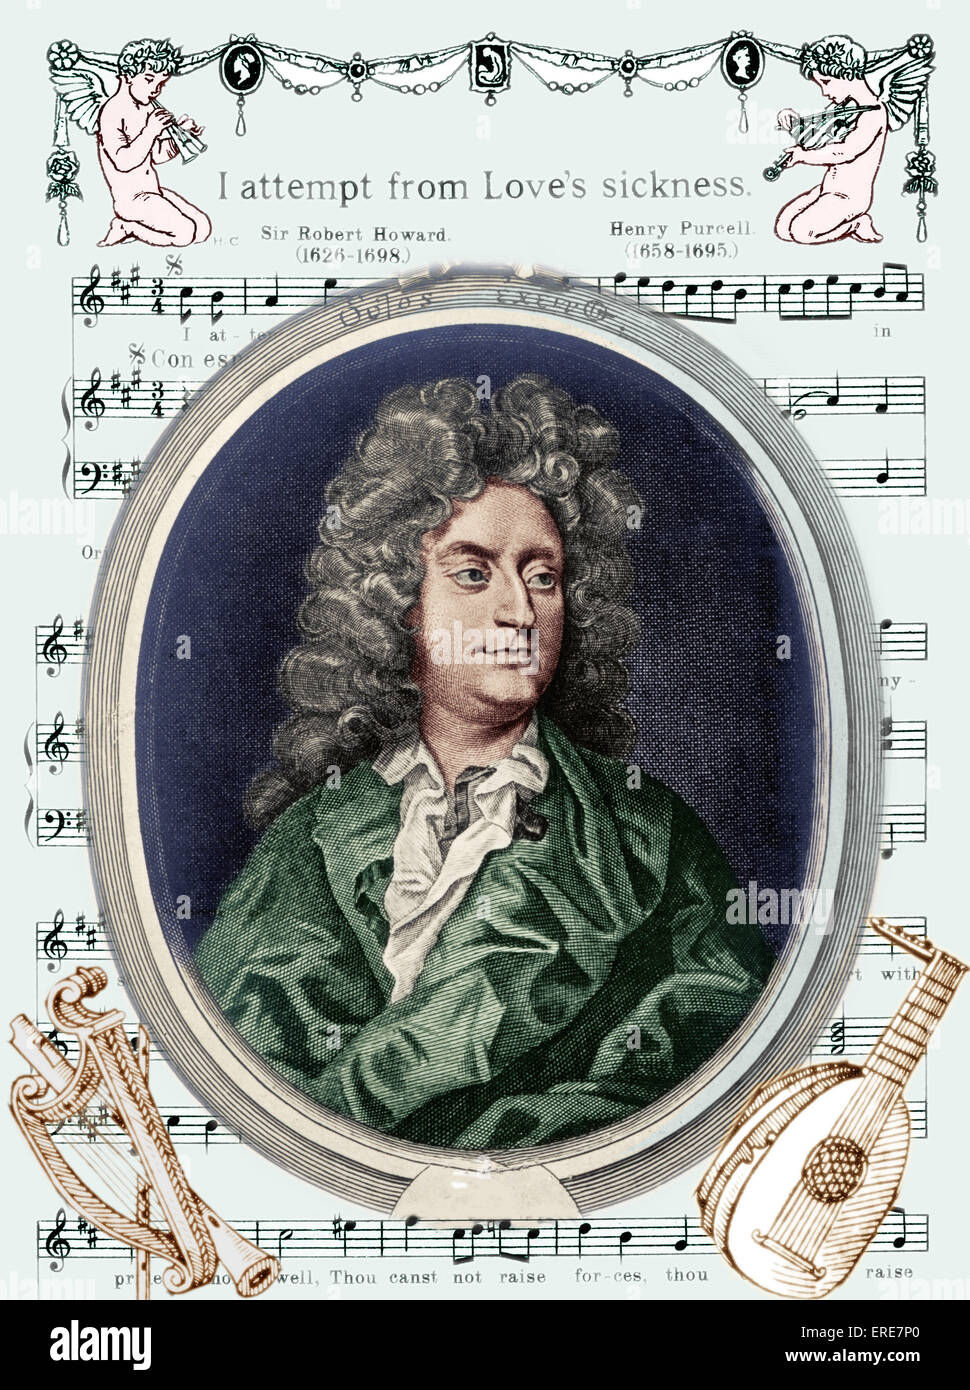 Henry Purcell collage. Portrait against score backdrop ' I attempt from Love's Sickness' - first page of score. Words by Sir Robert Howard (1626-1698). With angels playing instruments. Song begins 'I attempt from Love's sickness to fly in vain'. From 'The Indian Queen'. Purcell: English composer, c.1659 - 21 November 1695. Stock Photo